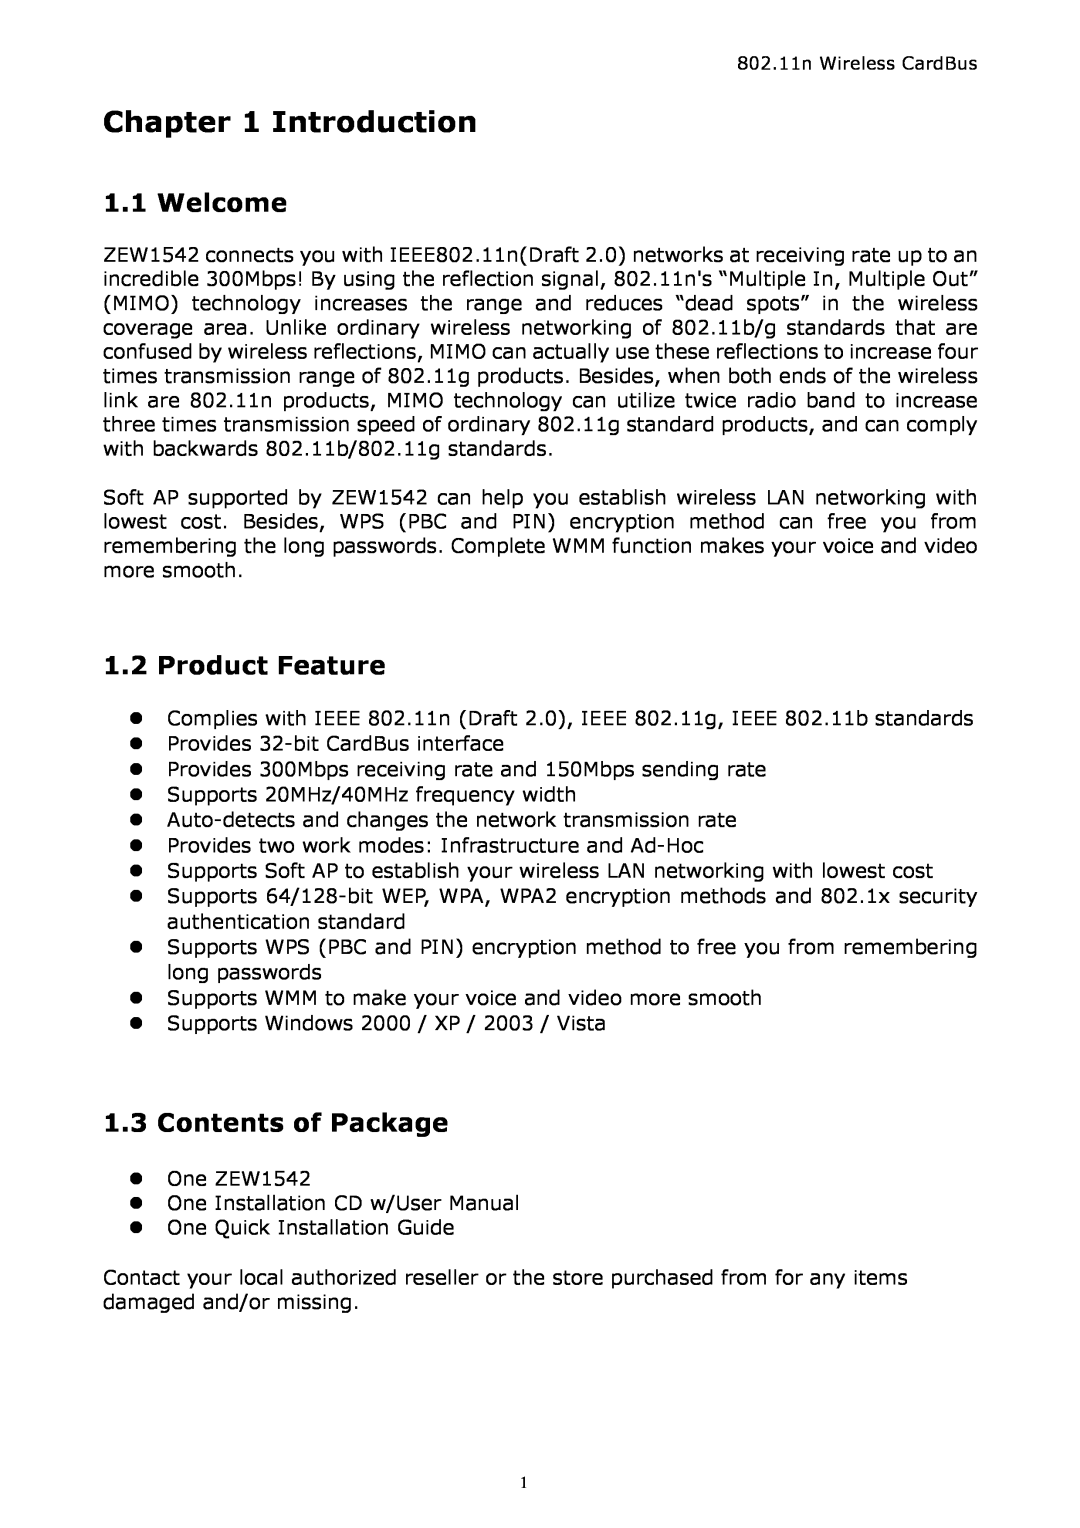 Zonet Technology ZEW1542 manual Introduction, Welcome, Product Feature, Contents of Package 